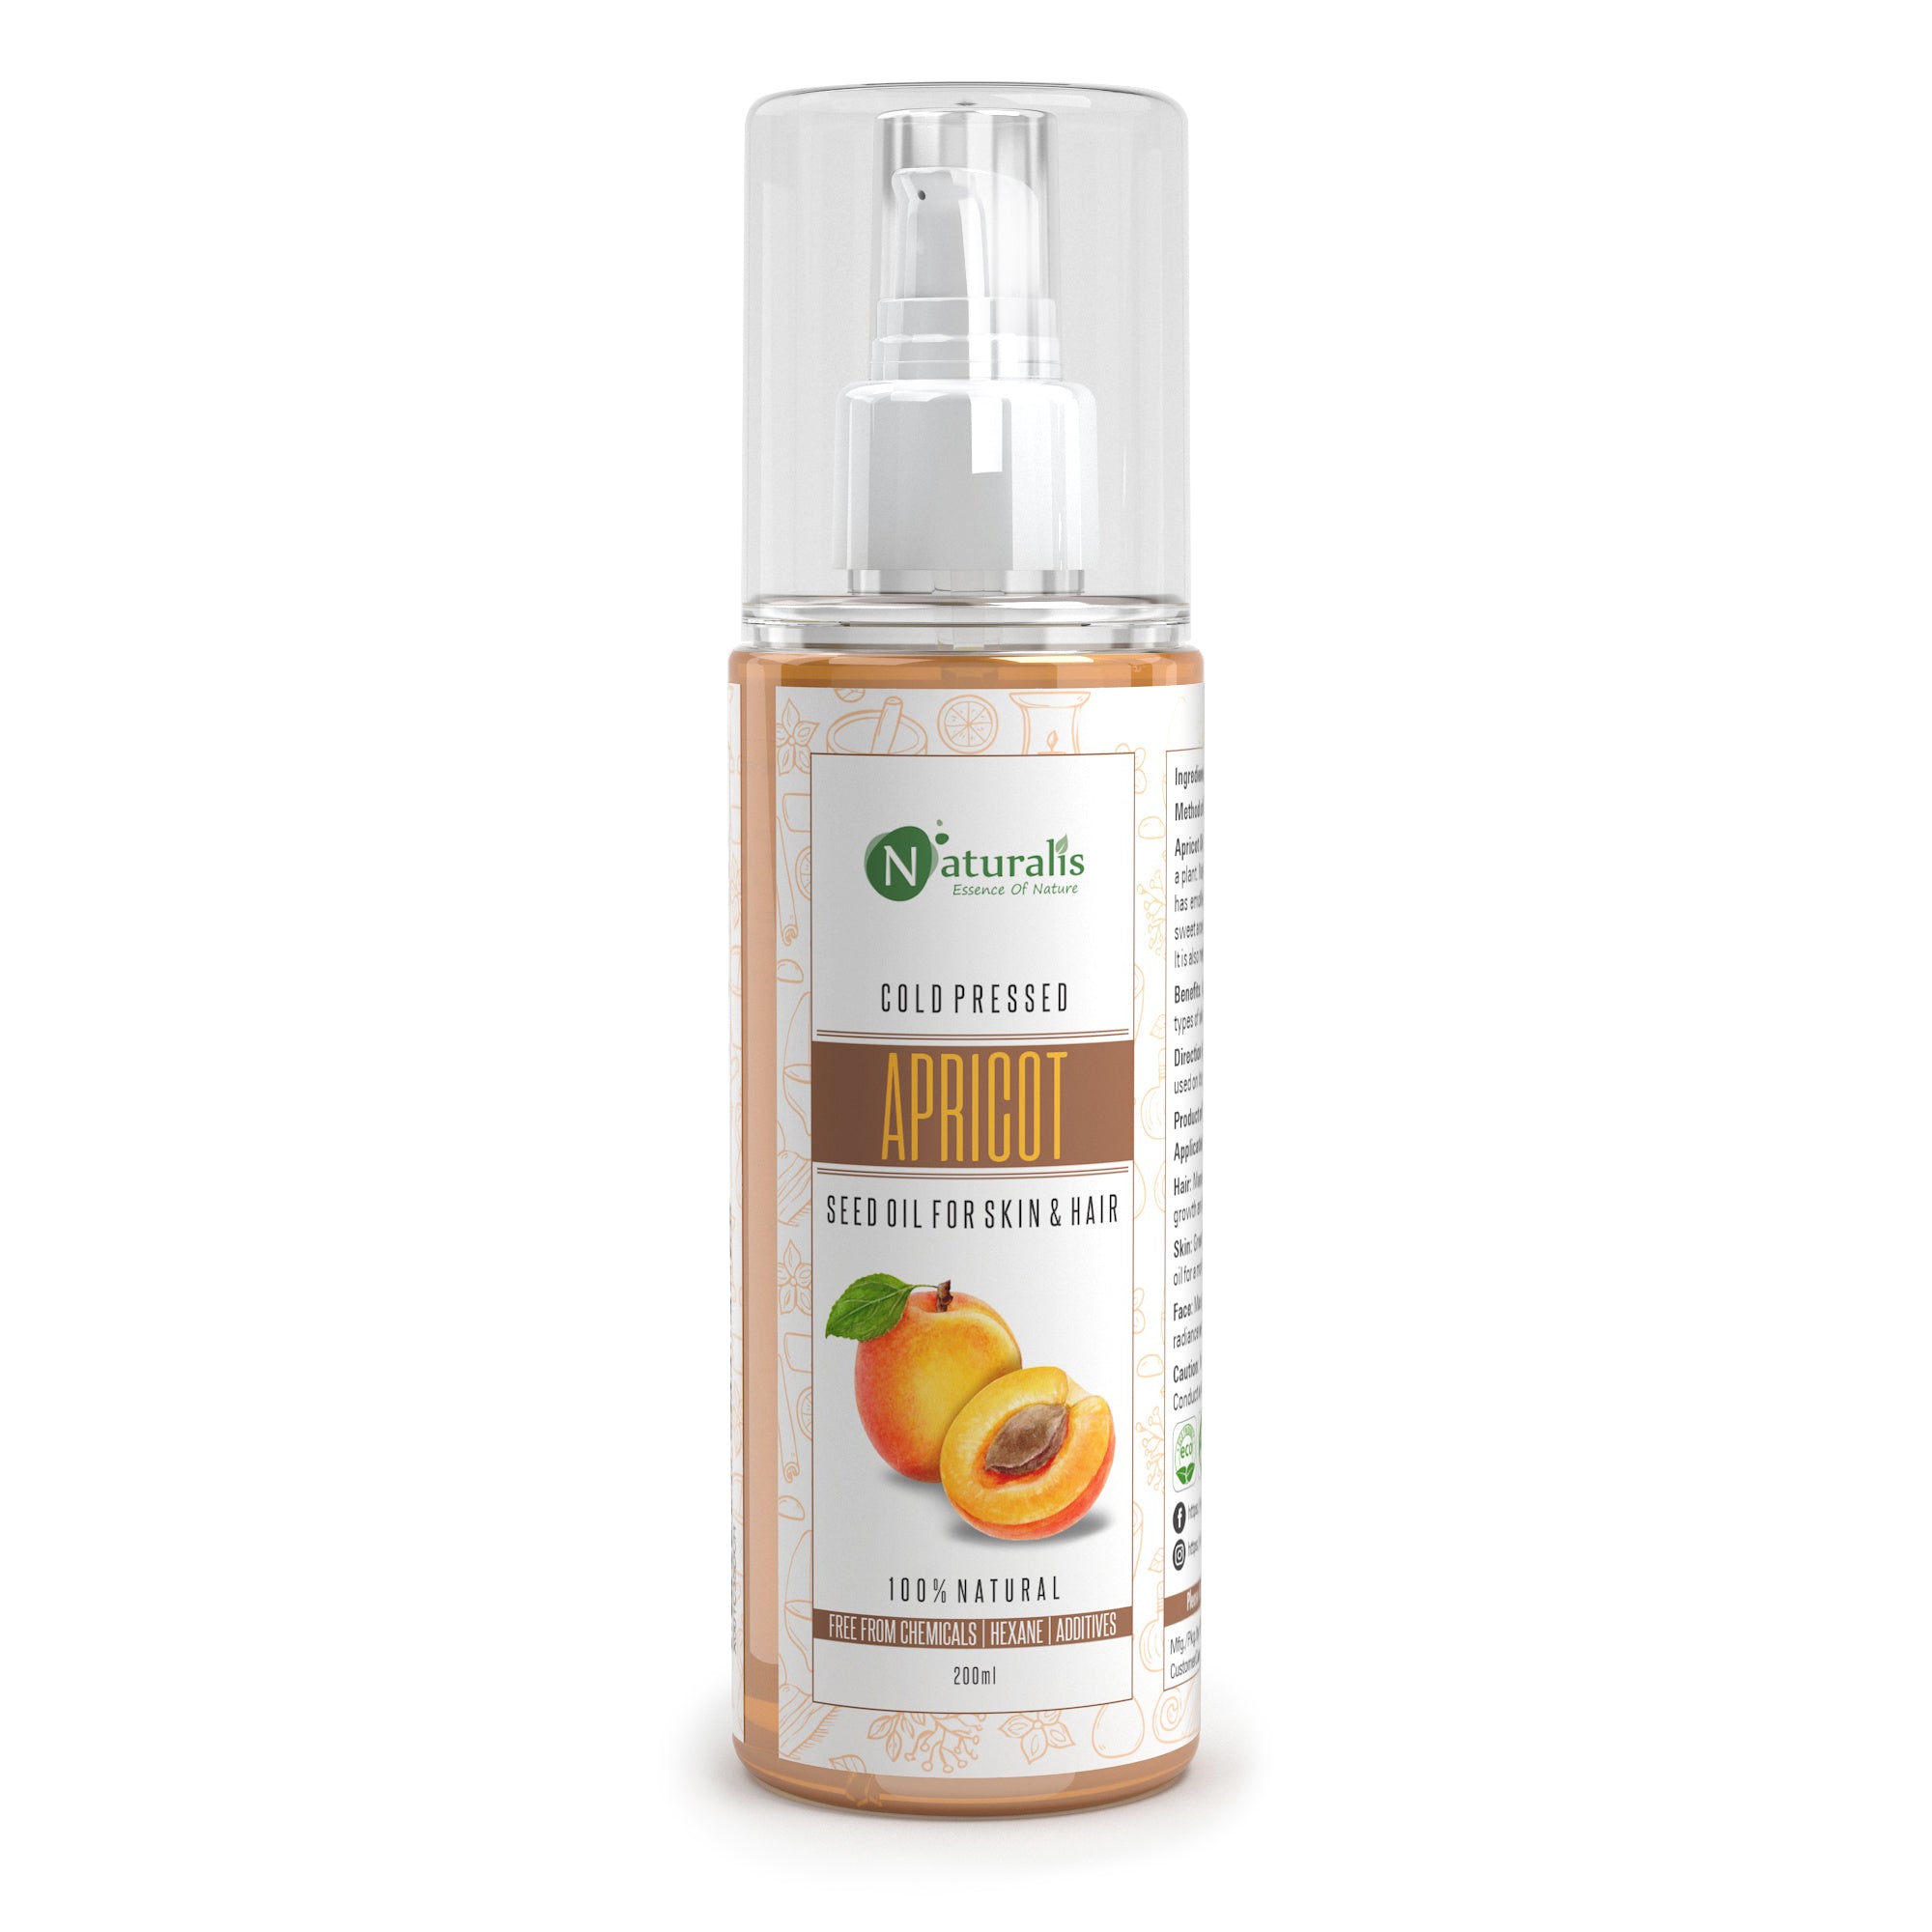 Cold pressed Apricot Carrier Oil for Skin & Face Moisturizer, Hair Growth, Aromatherapy Carrier Massage Oil, 200ml - Naturalis